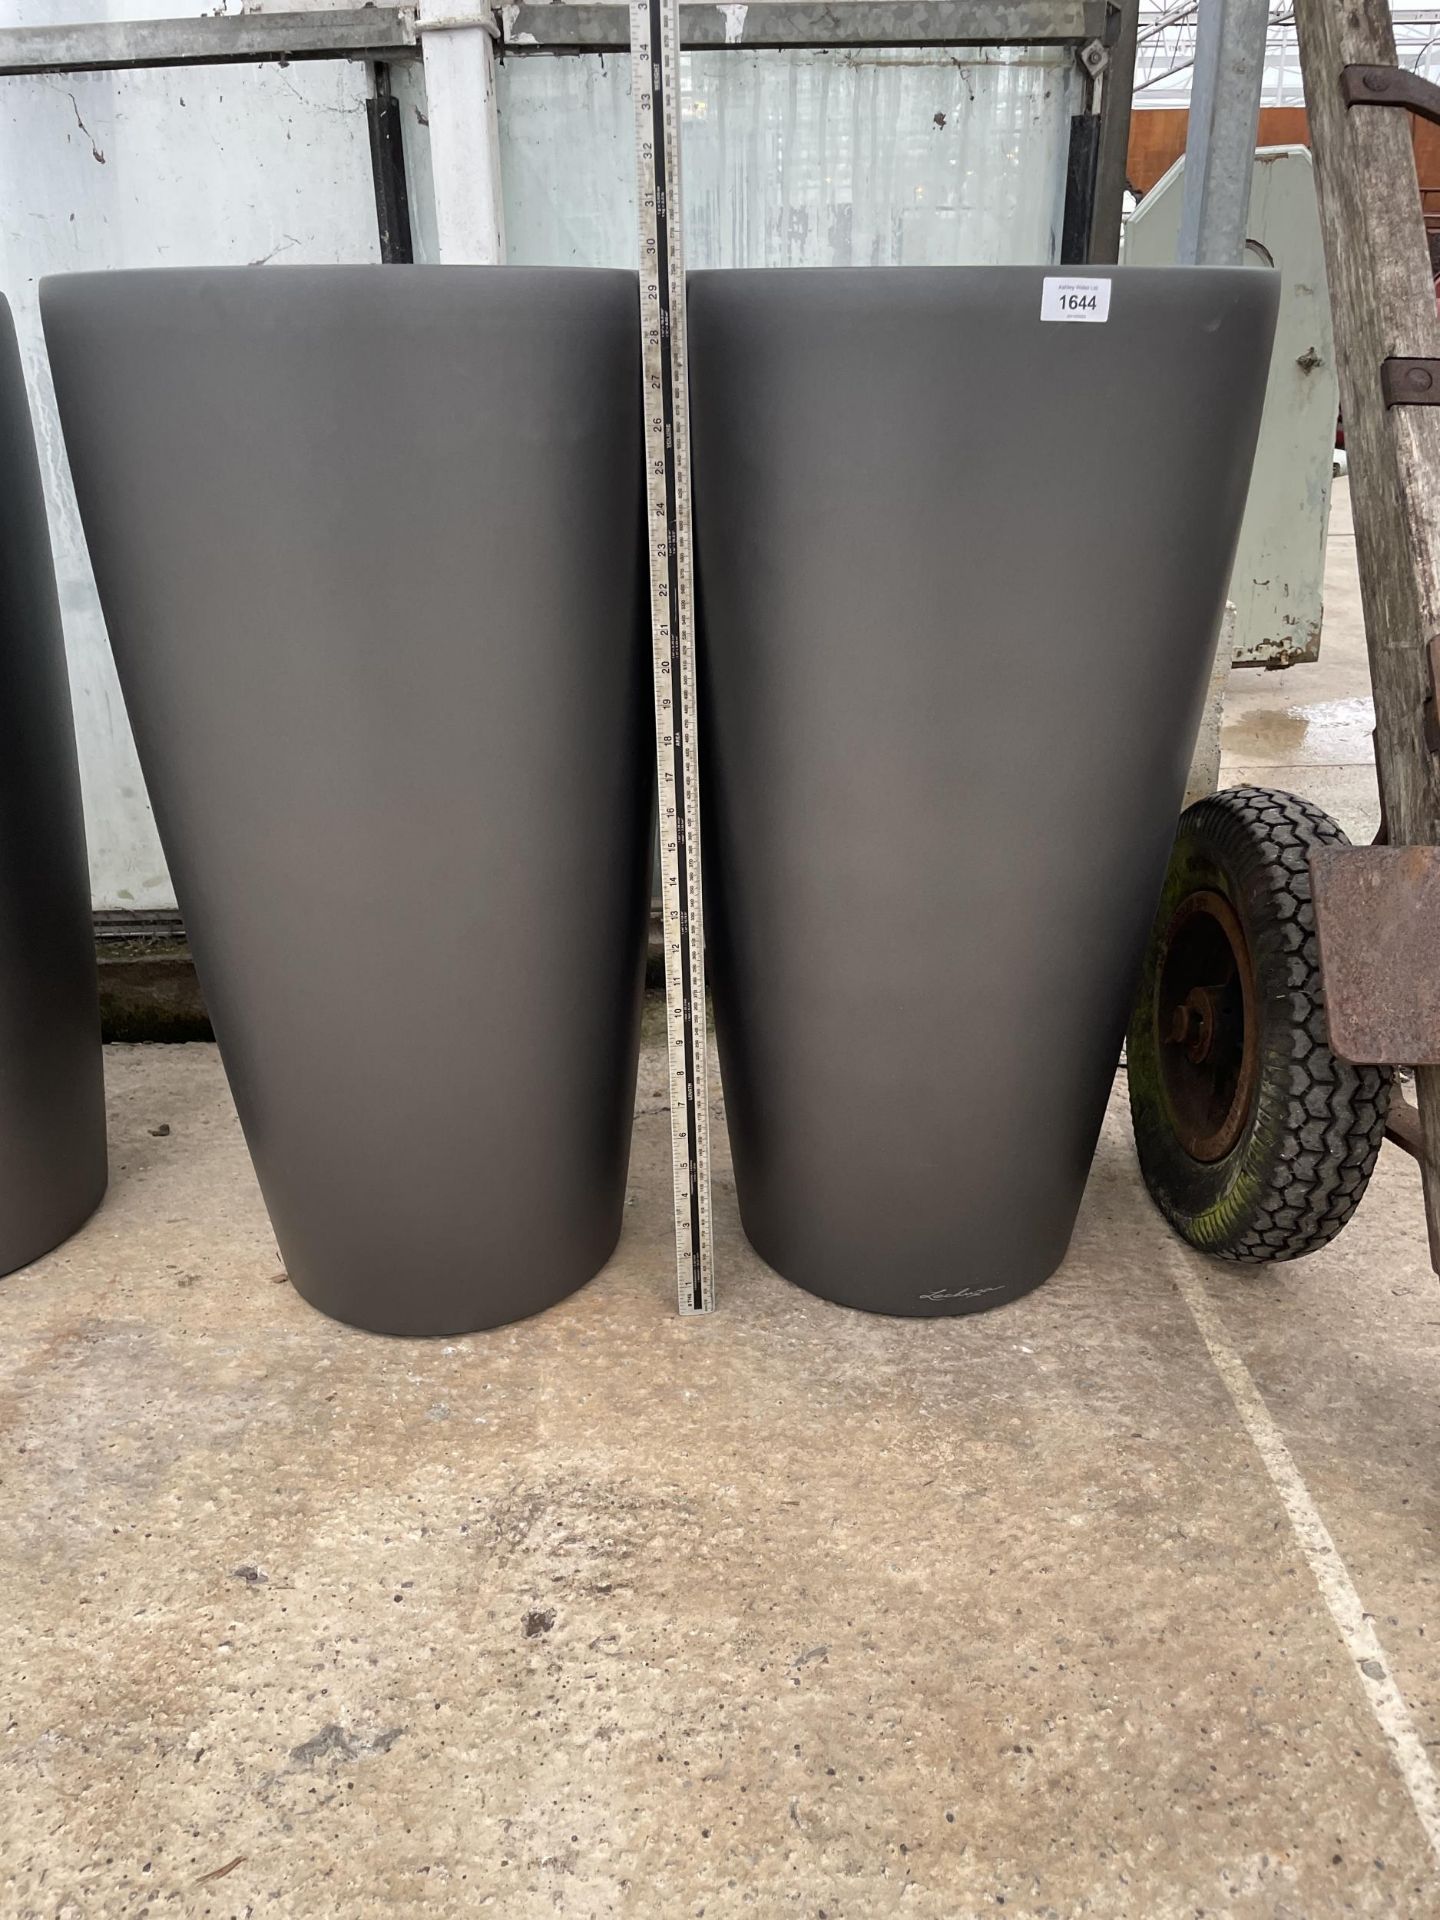 A PAIR OF MODERN LECHUZA FIBRE GLASS INDOOR/OUTDOOR PLANTERS (H:75CM)